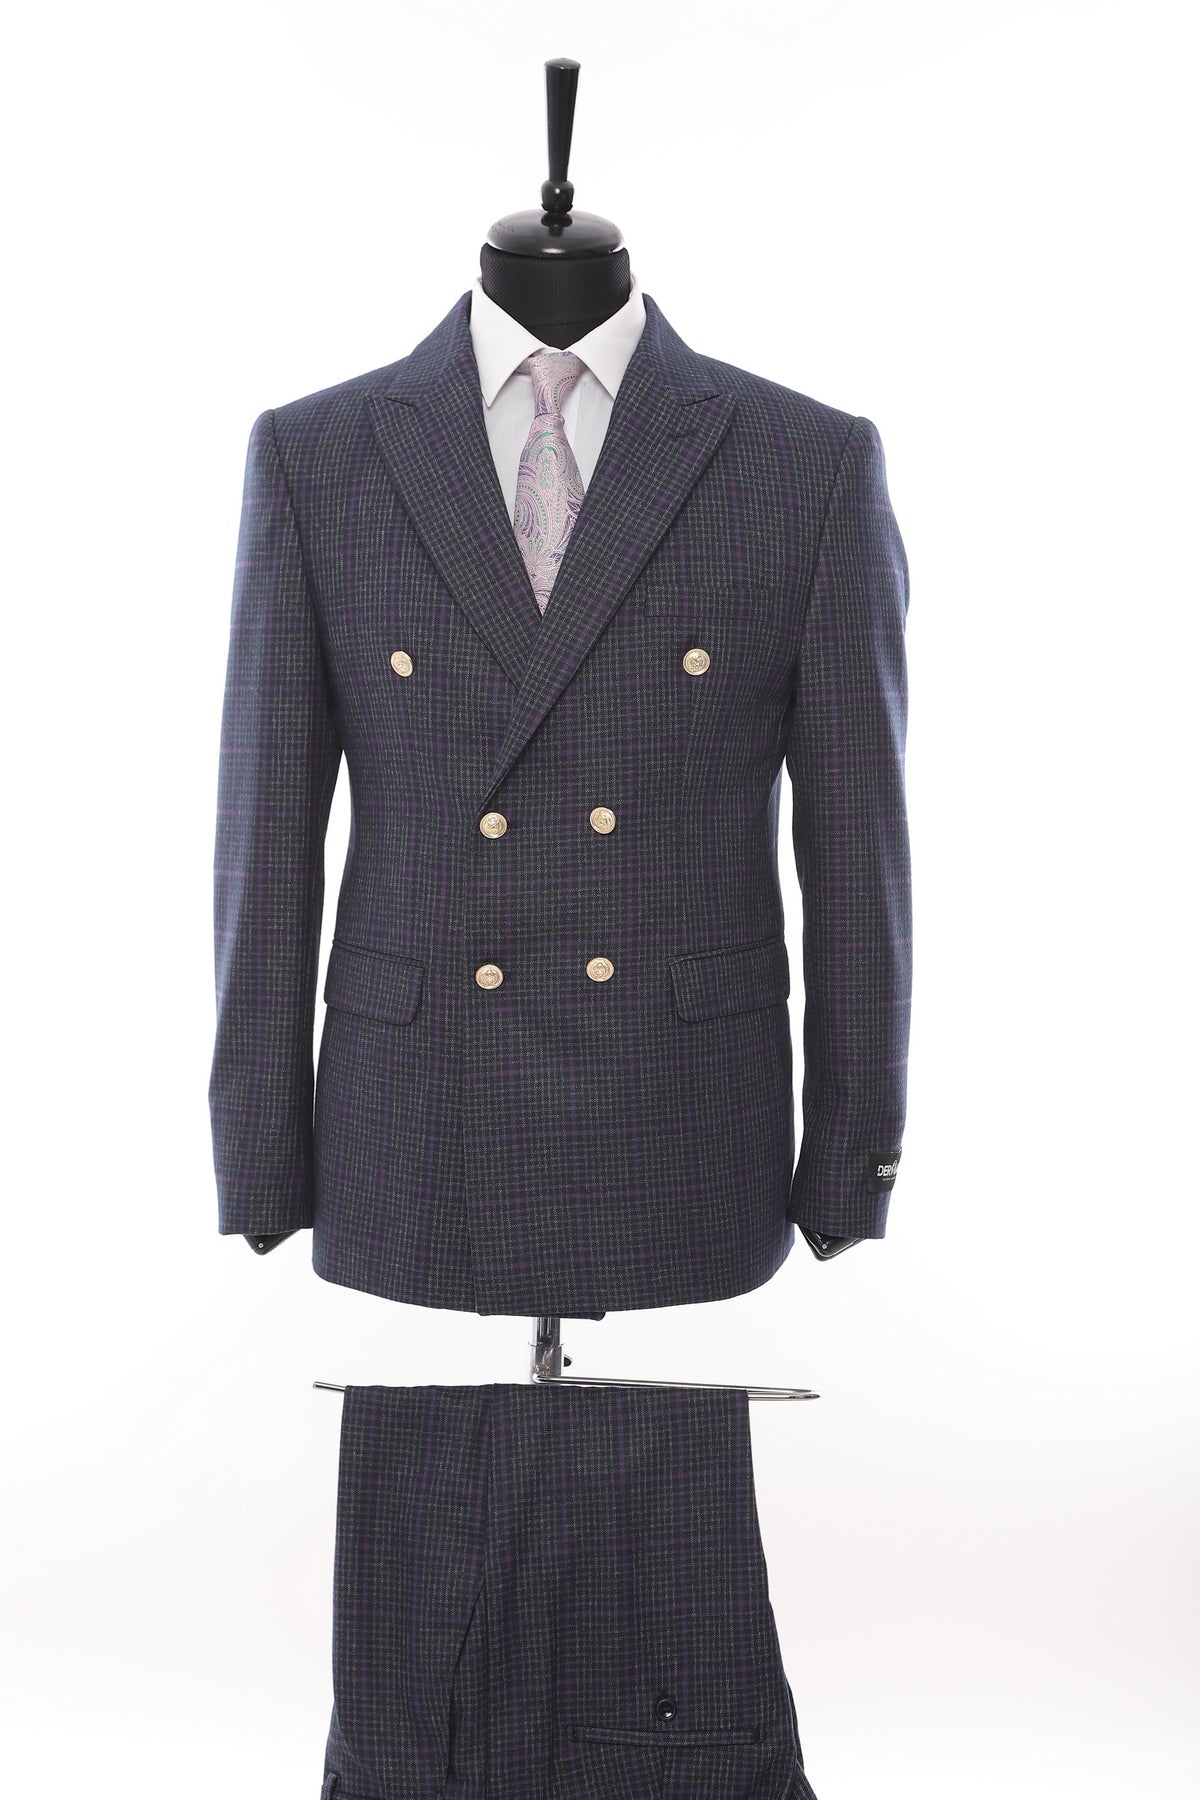 Grey Check Suit 2 Piece Double Breasted Suit